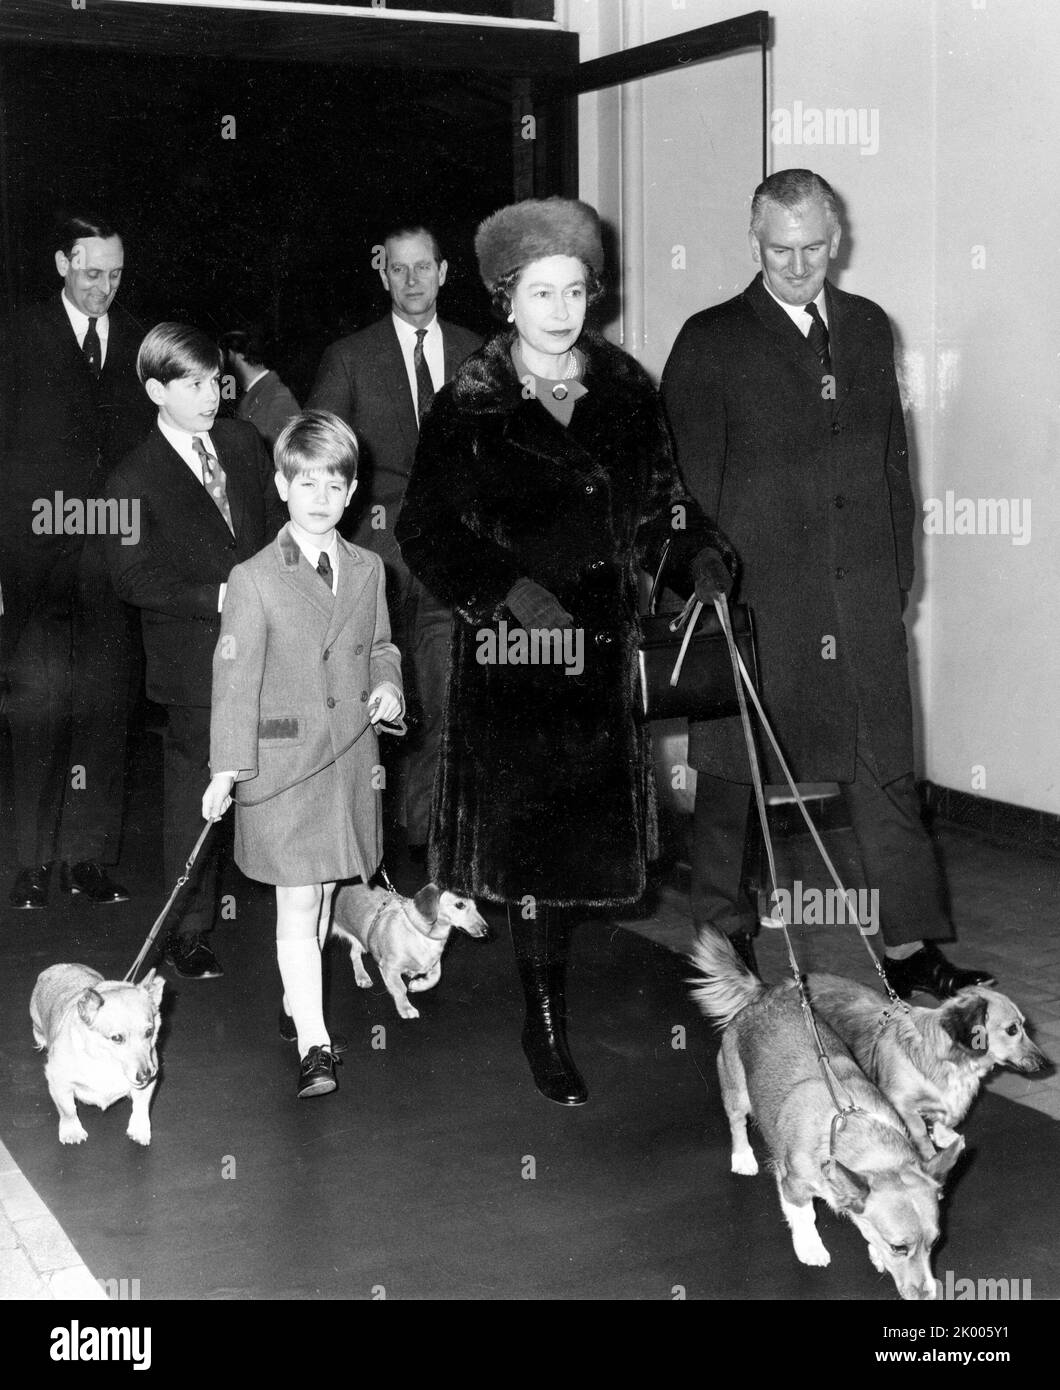 Dec. 29, 1971 - London, England, U.K. - The Royal Family leave for Sandringham from Liverpool Street Station. QUEEN ELIZABETH II, center, and PRINCE PHILIP, fourth from left, walk with their two youngest sons, PRINCE ANDREW, second from left, and PRINCE EDWARD, third from left, walk with the family dogs on their way to the train. (Credit Image: ¬ © Keystone Press Agency/ZUMA Press Wire) Stock Photo